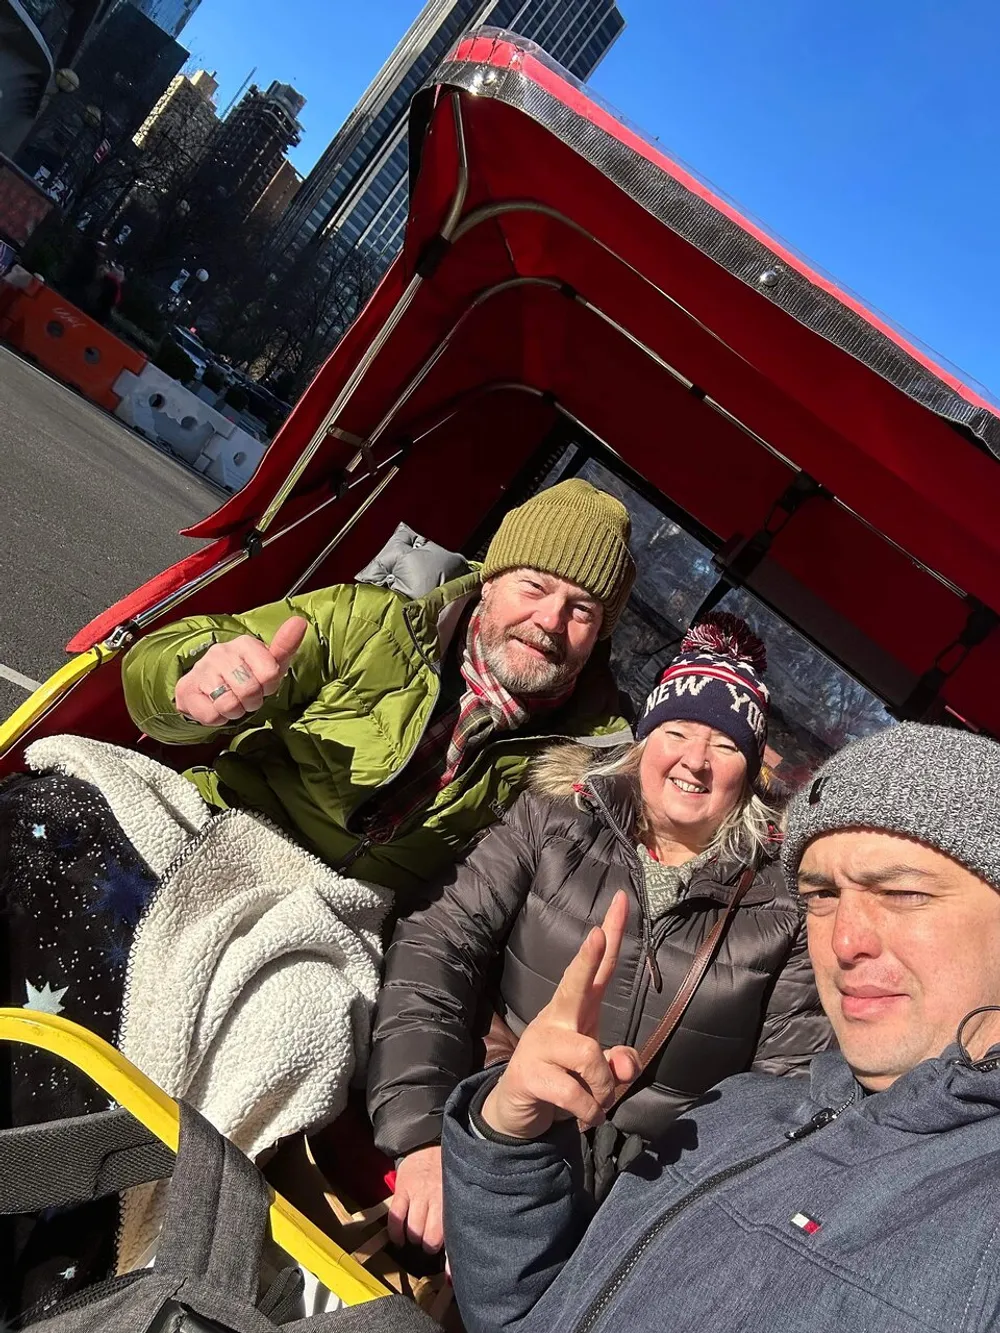 Three individuals are smiling and posing for a selfie while seated in a red horse-drawn carriage with one person making a peace sign